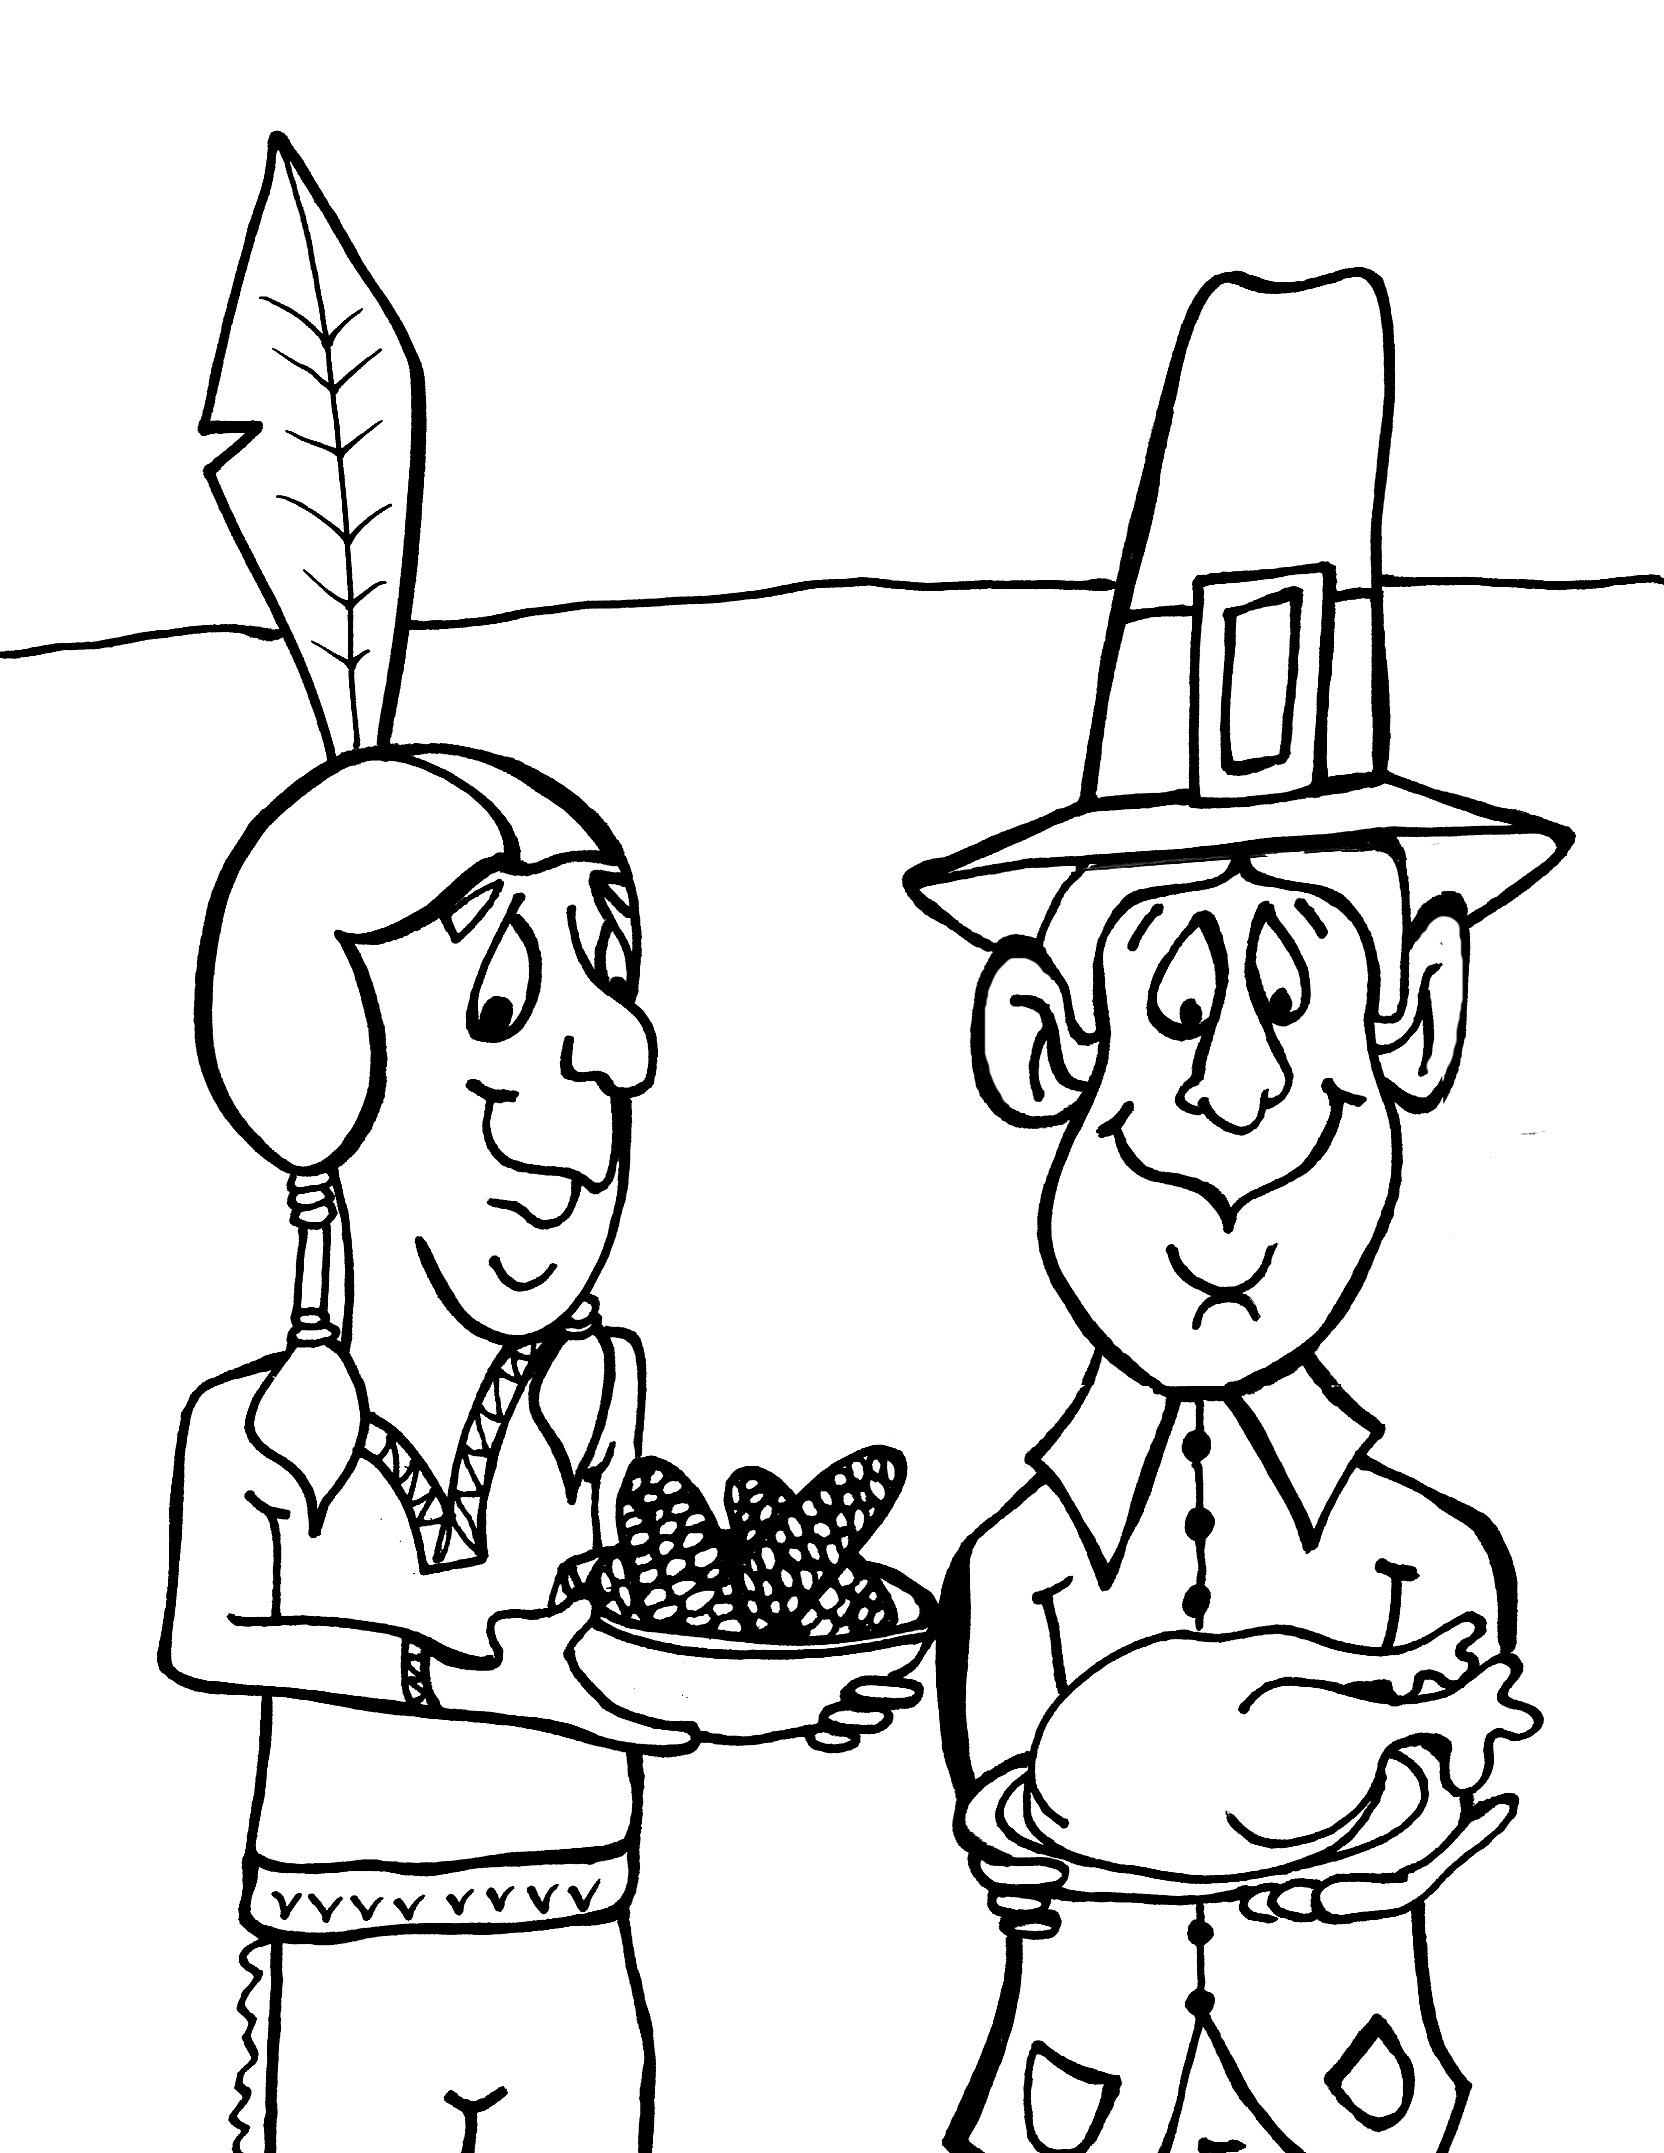 Find Free Printable Thanksgiving Coloring Pages Worksheets